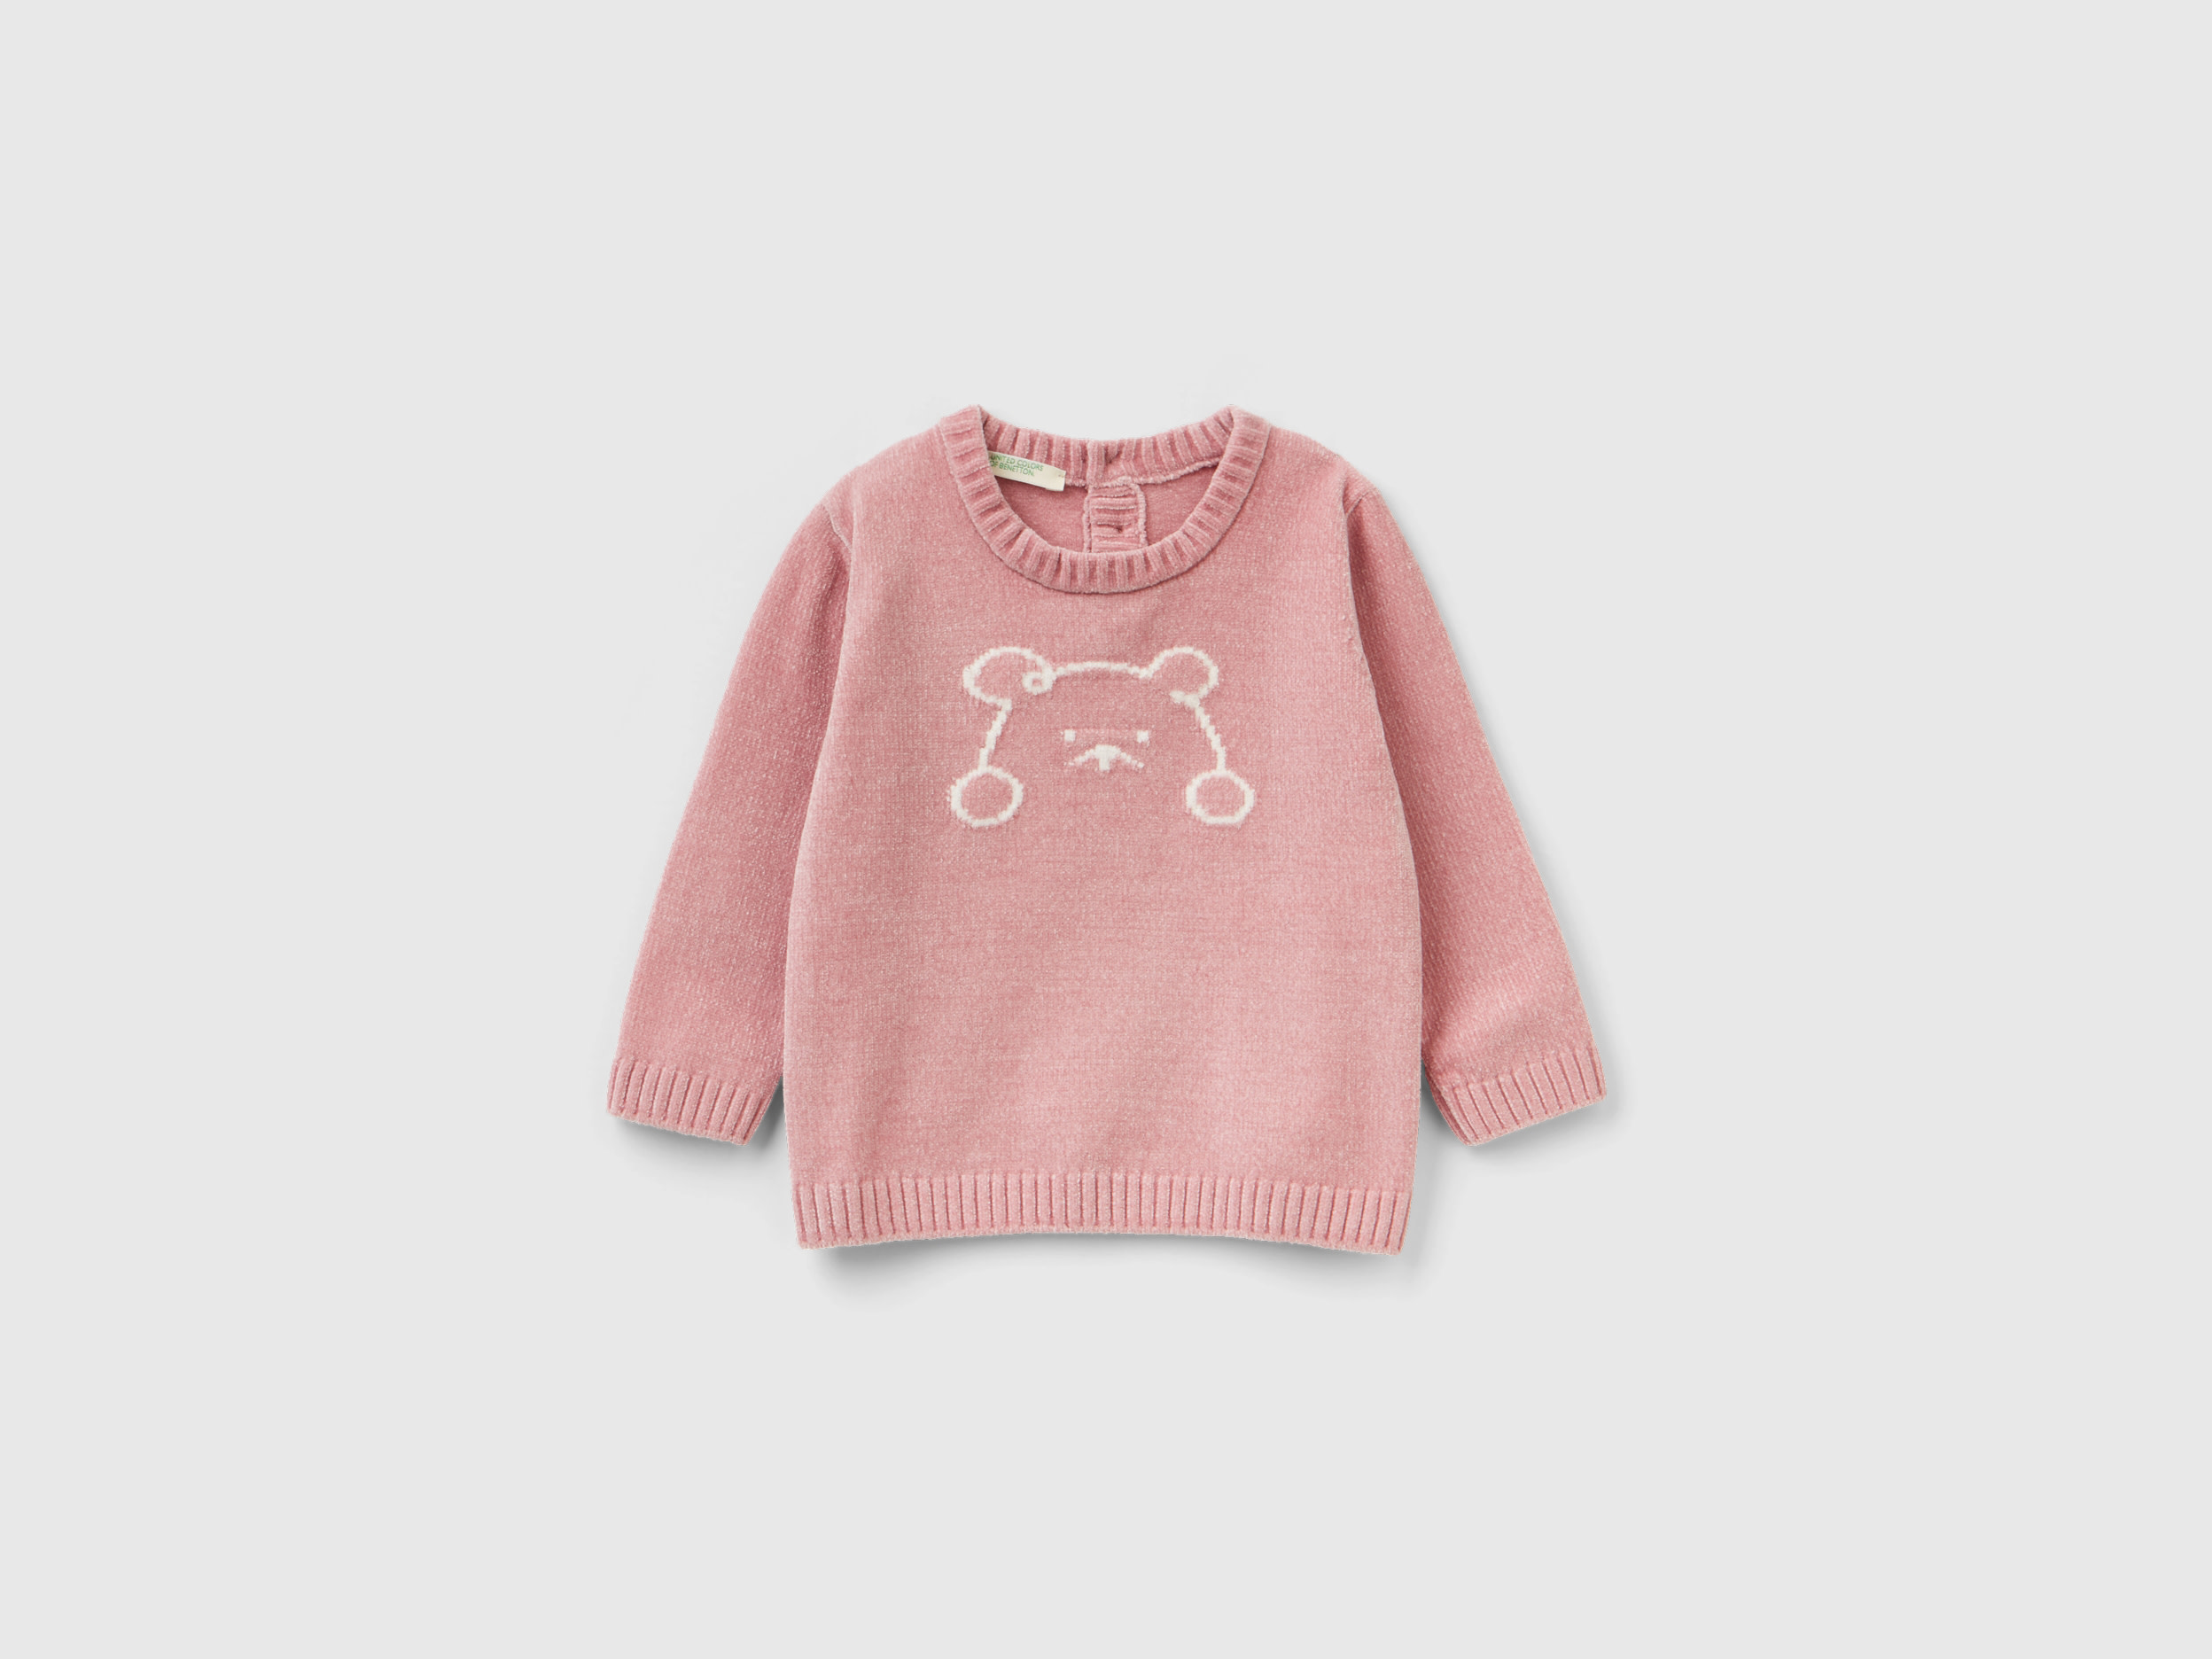 Benetton, Chenille Sweater With Inlay, size 9-12, Pink, Kids